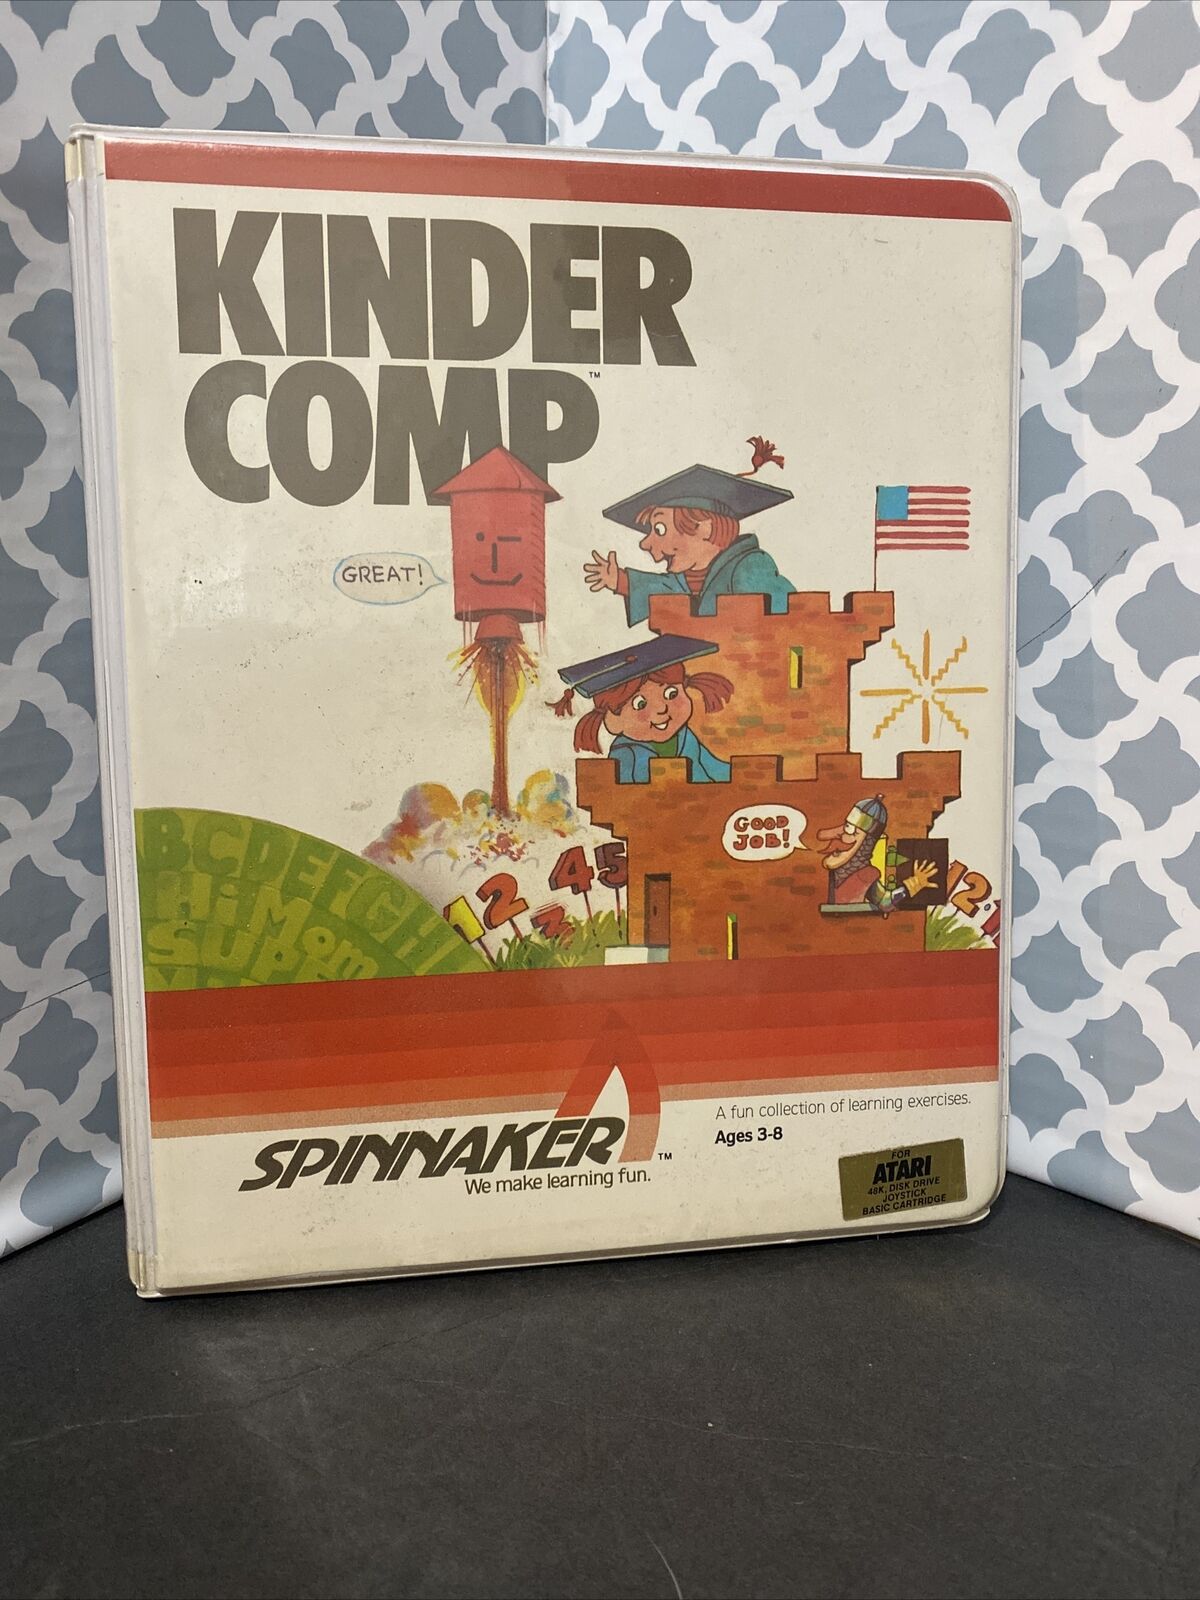 Kinder Comp by Spinnaker for Atari 800 Computer Software Disk w/Case & Manual